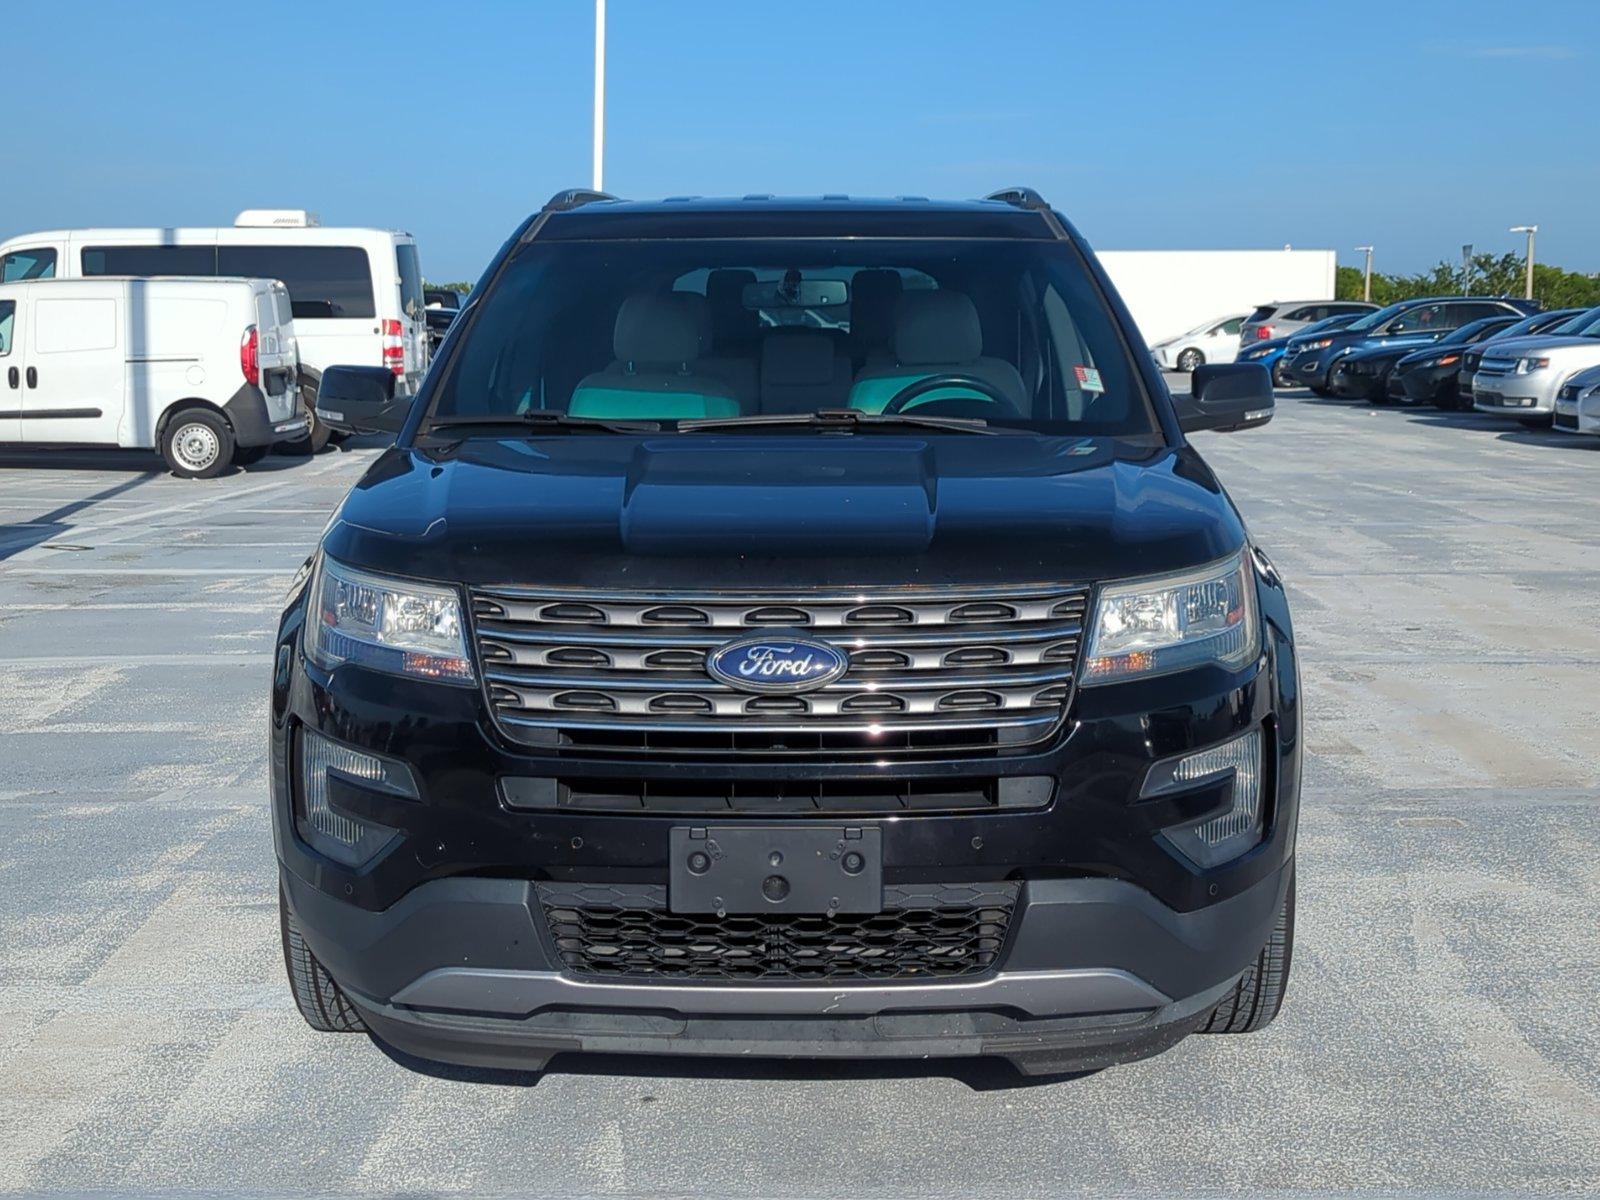 2016 Ford Explorer Vehicle Photo in Ft. Myers, FL 33907